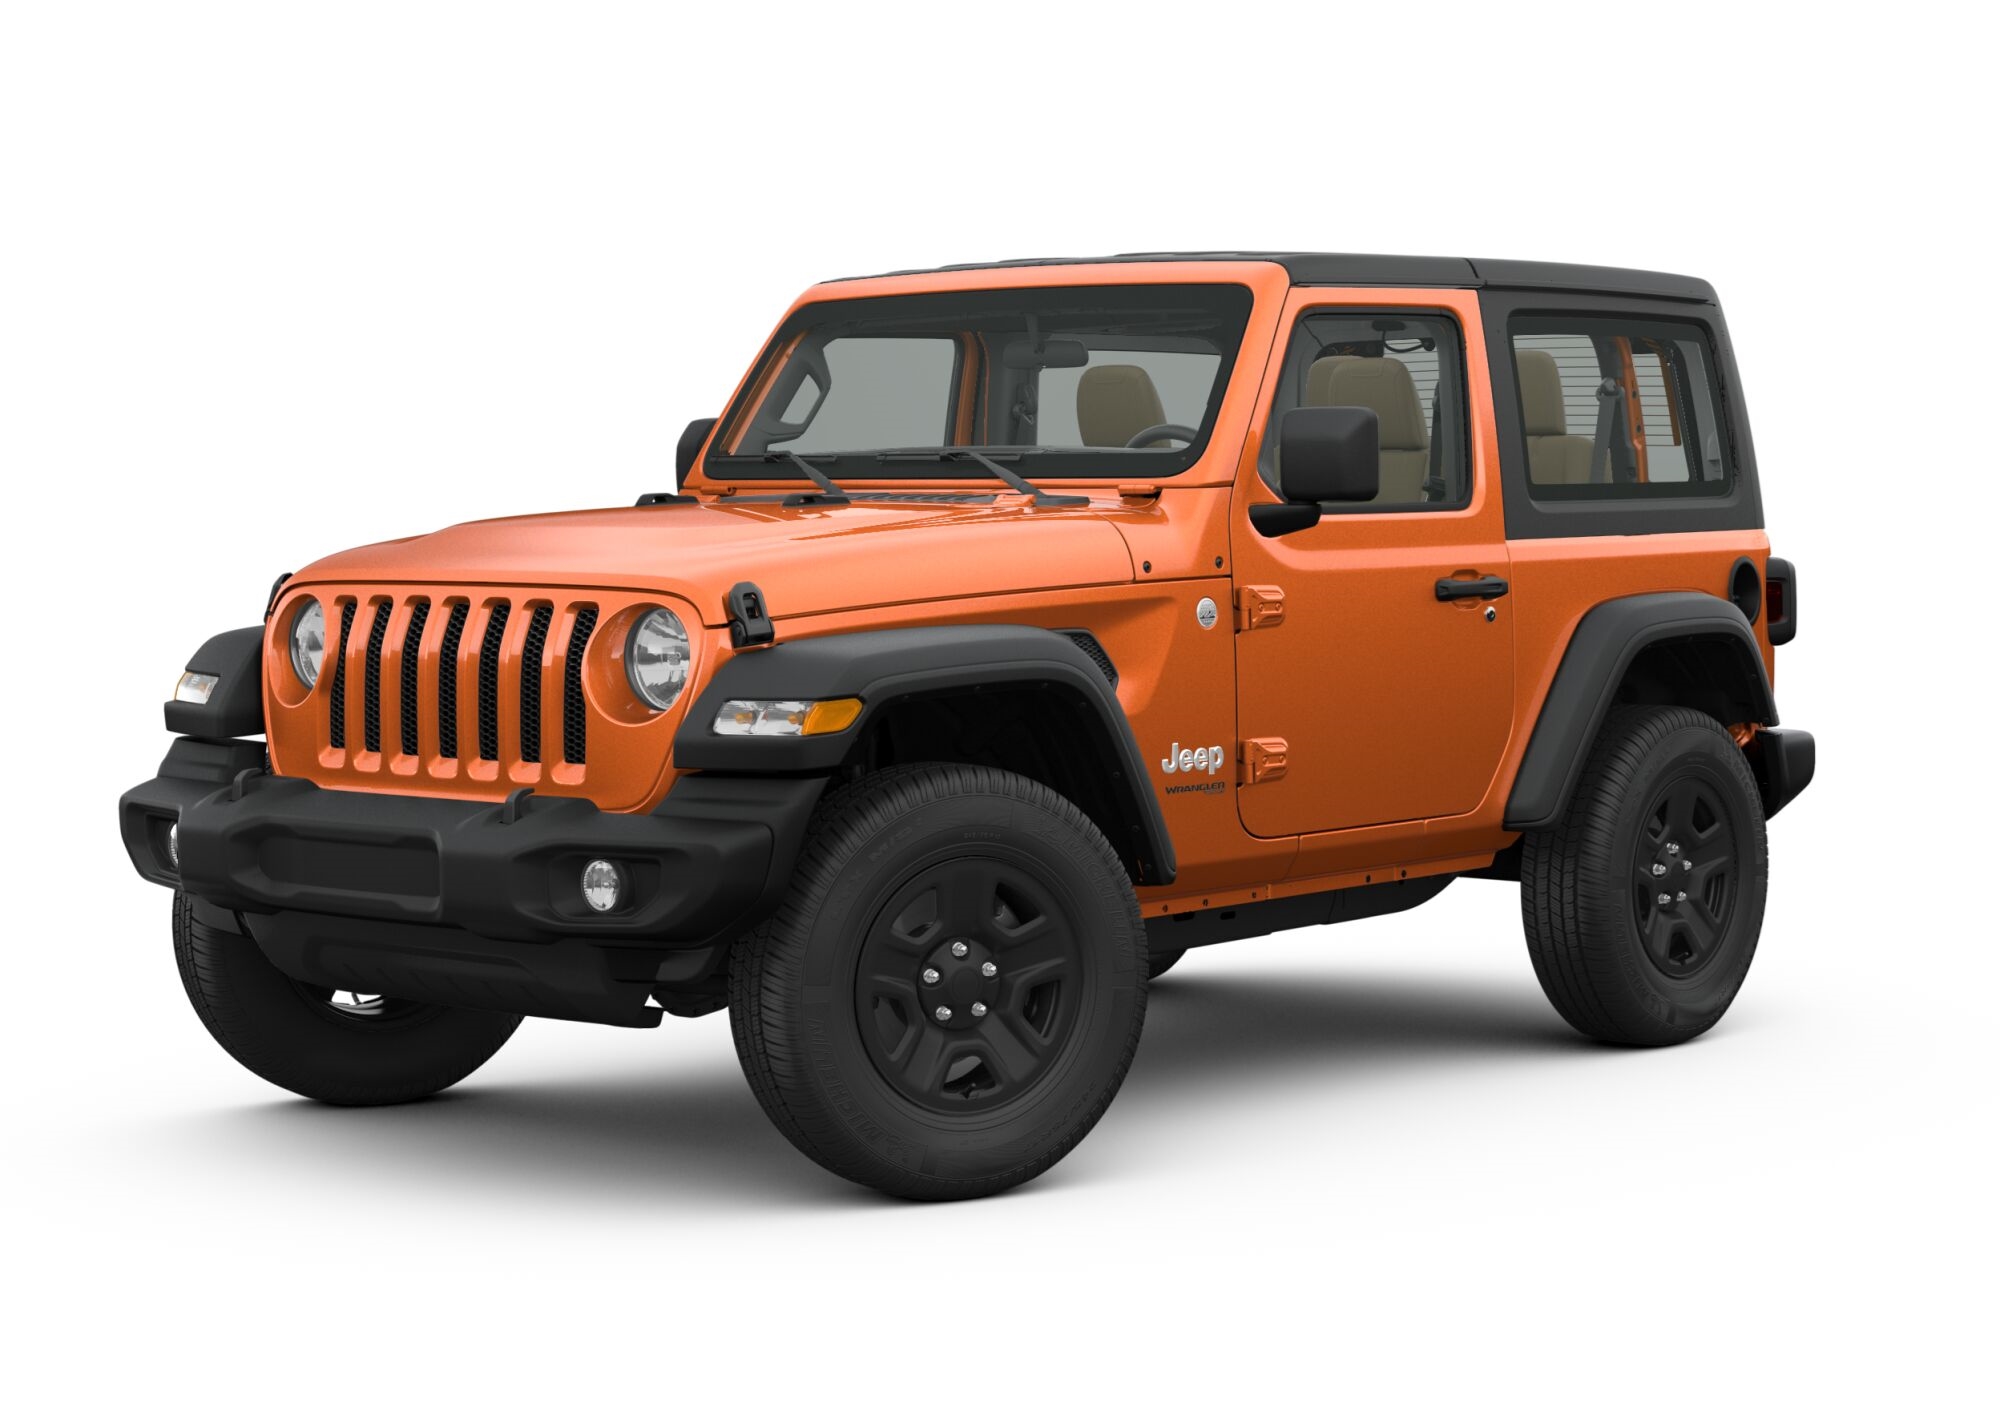 2022 Jeep Wrangler Willys Full Specs, Features and Price | CarBuzz